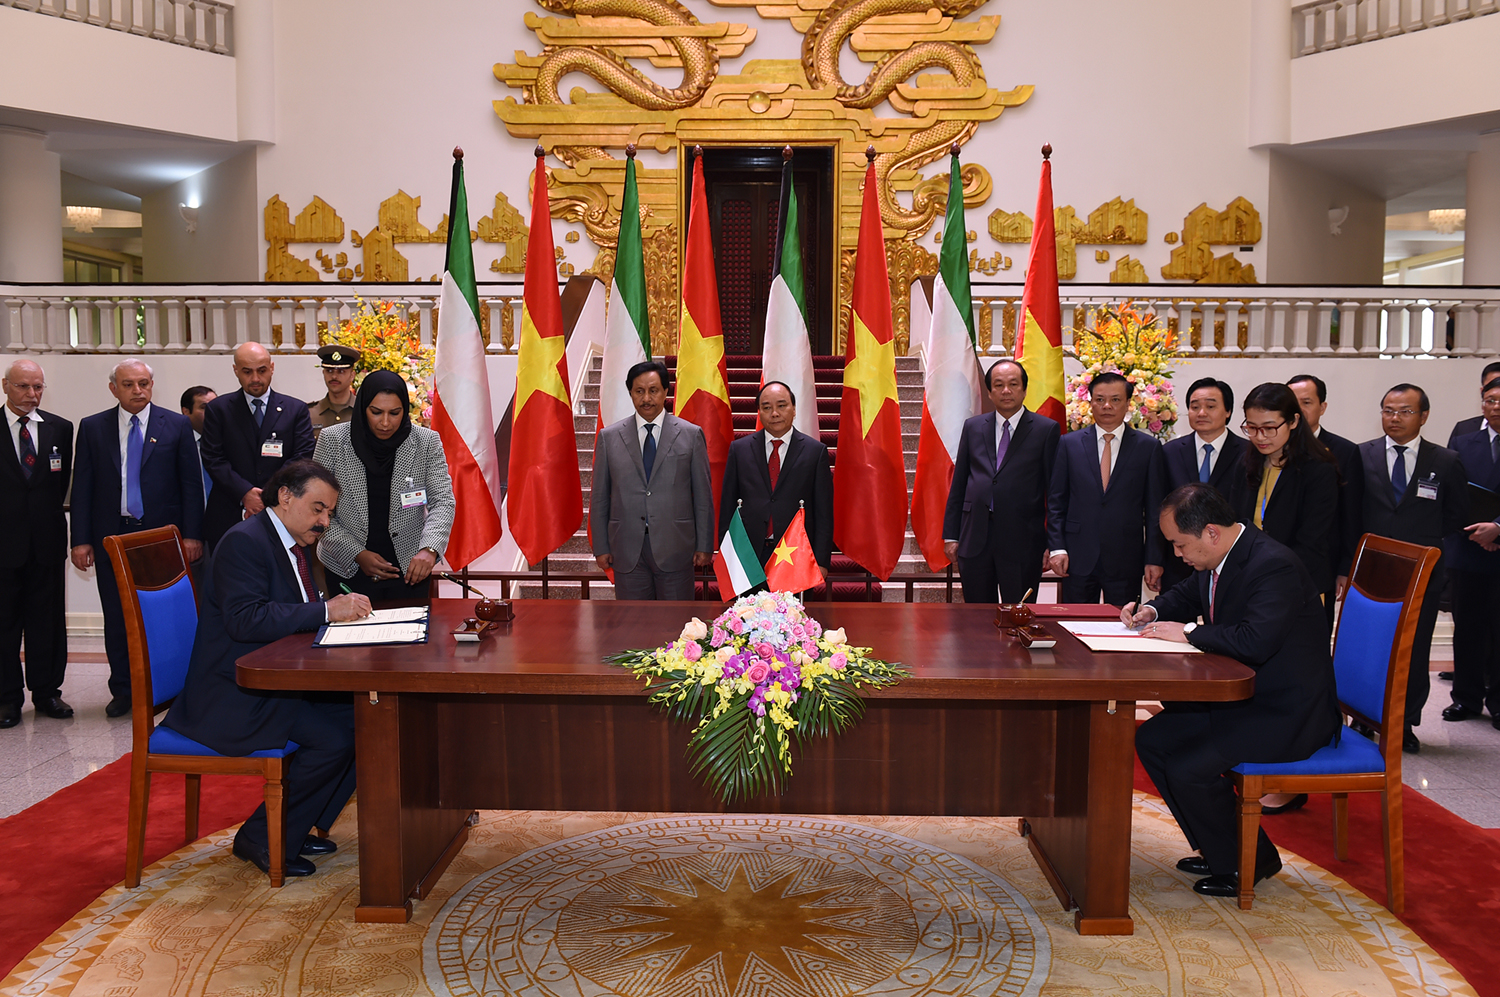 Deputy Foreign Minister Khalid Suleiman Al-Jarallah and Vietnamese Deputy Minister of Culture, Sports and Tourism Le Khanh Hai during the Signing ceremony